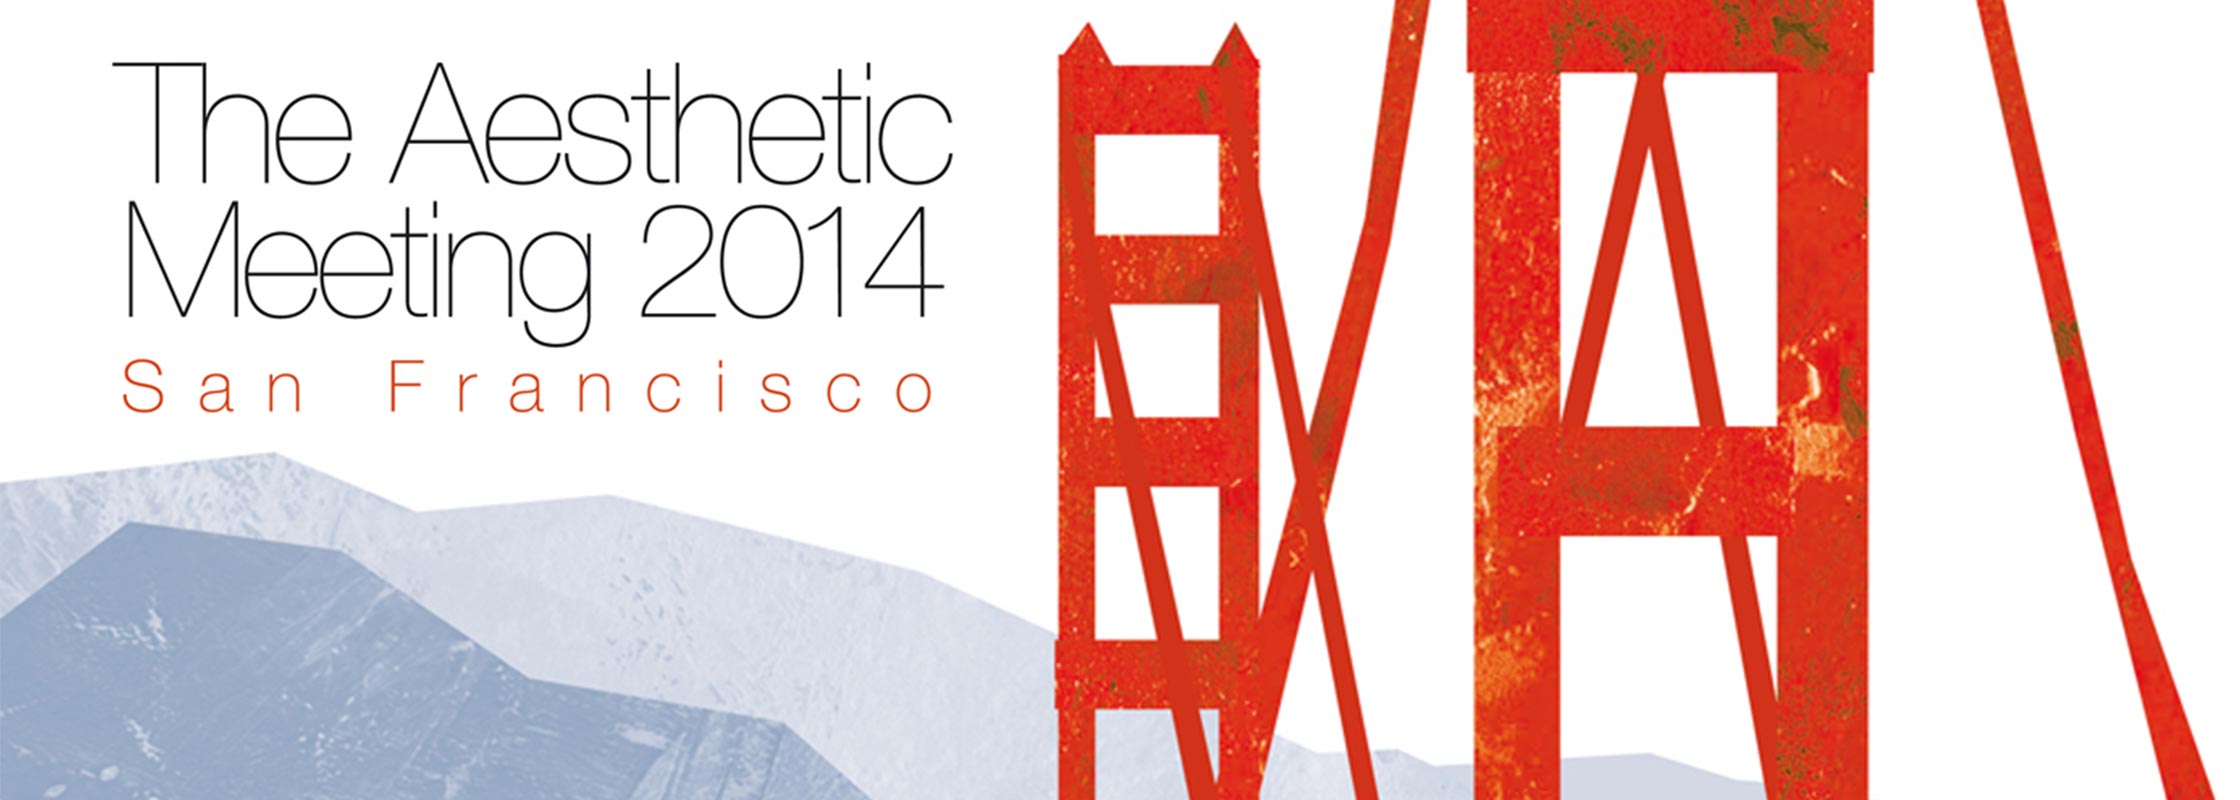 The Aesthetic Meeting 2014